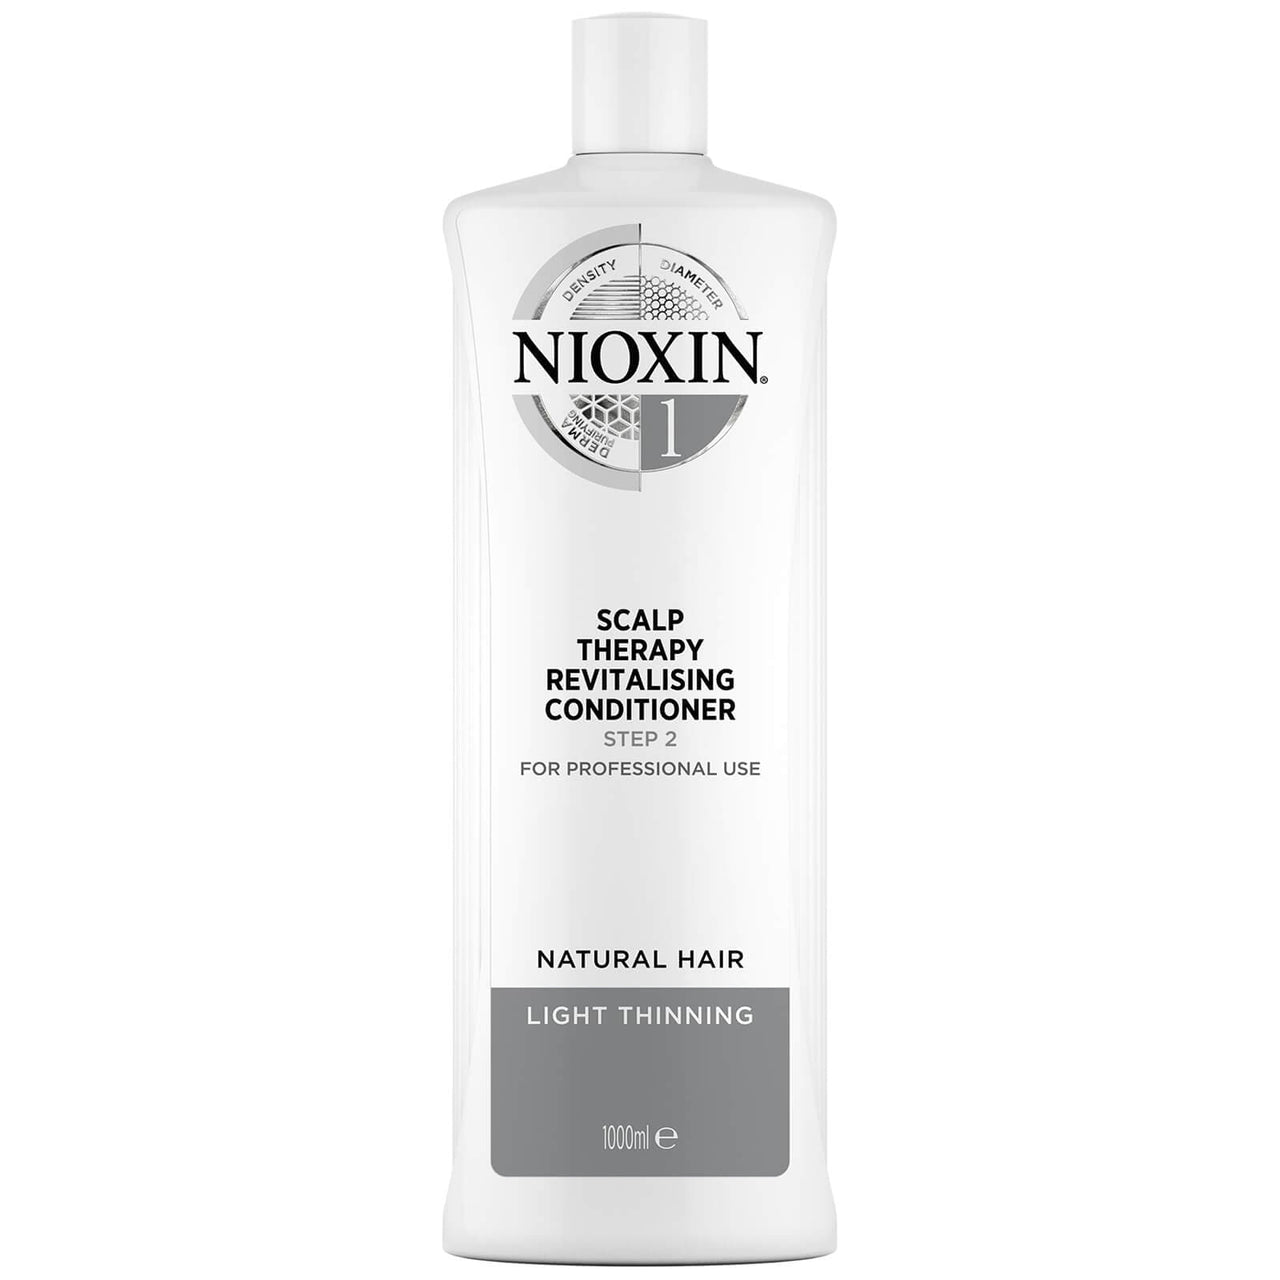 NIOXIN 3-Part System 1 Scalp Therapy Revitalising Conditioner for Natural Hair with Light Thinning